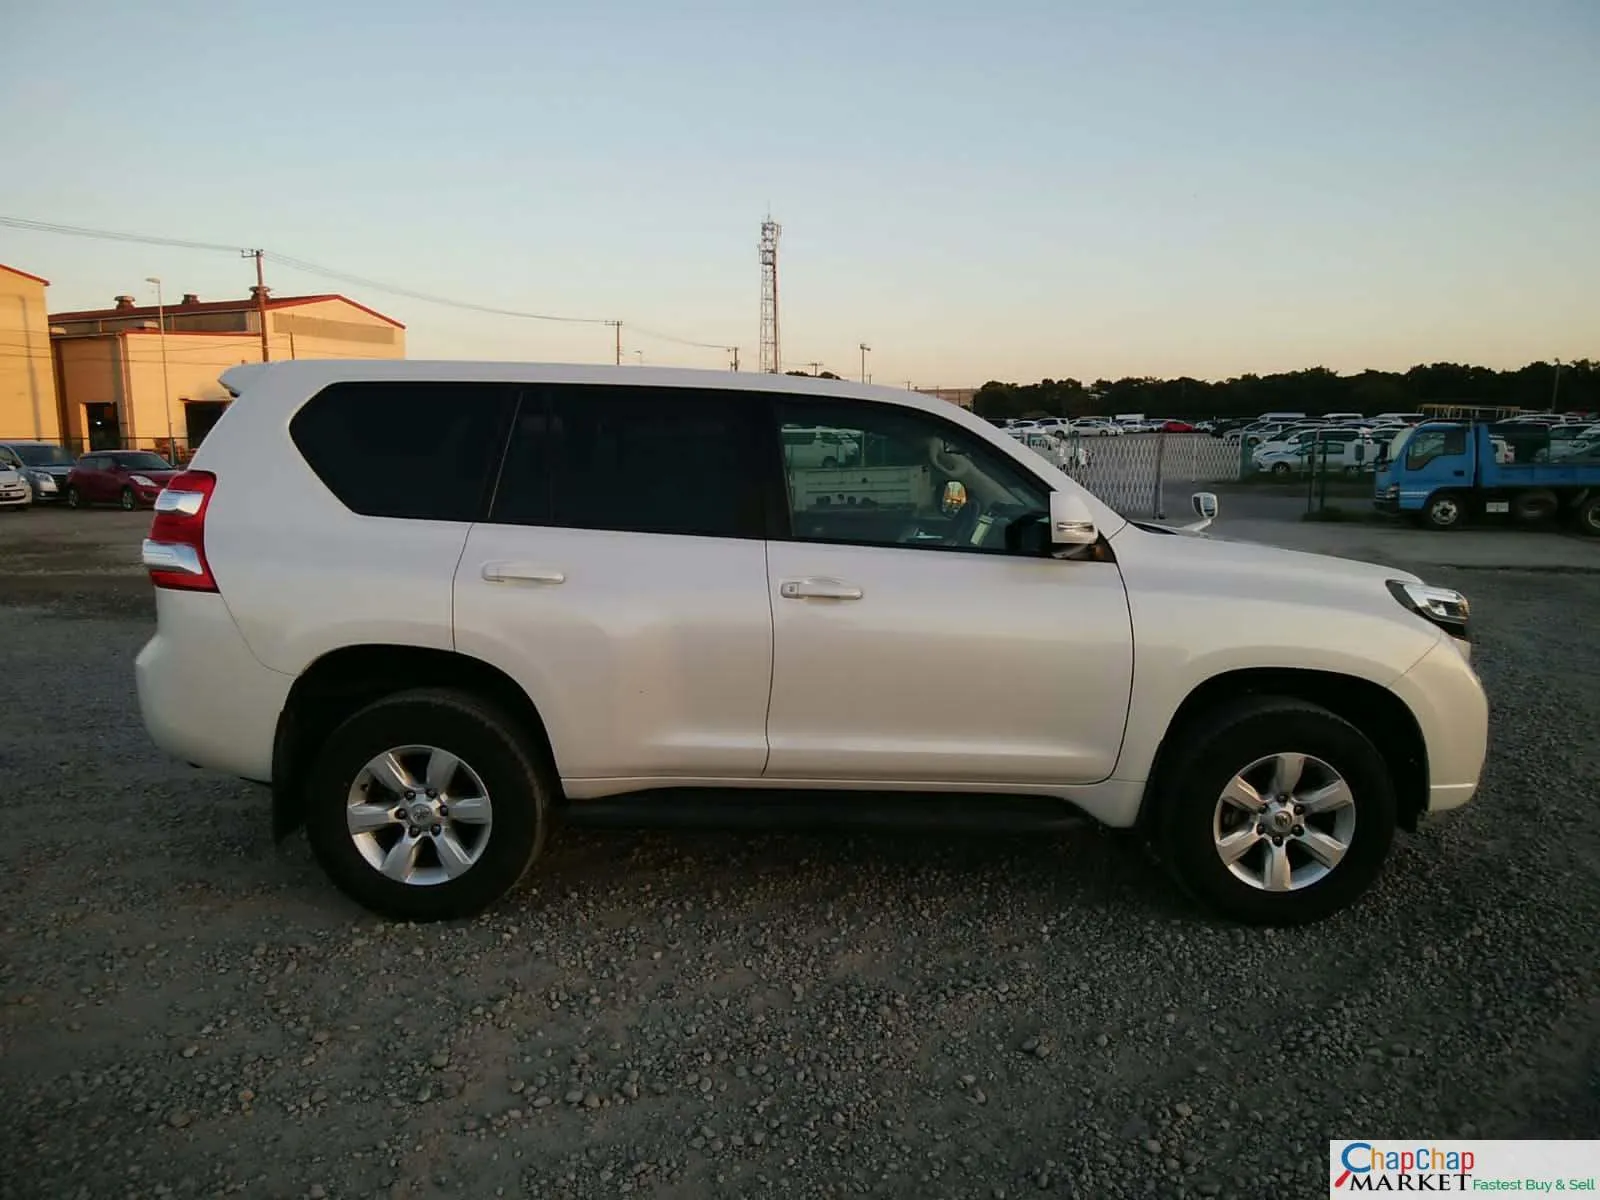 Cars Cars For Sale/Vehicles-Toyota PRADO 32K km Quick SALE TRADE IN OK EXCLUSIVE! 1